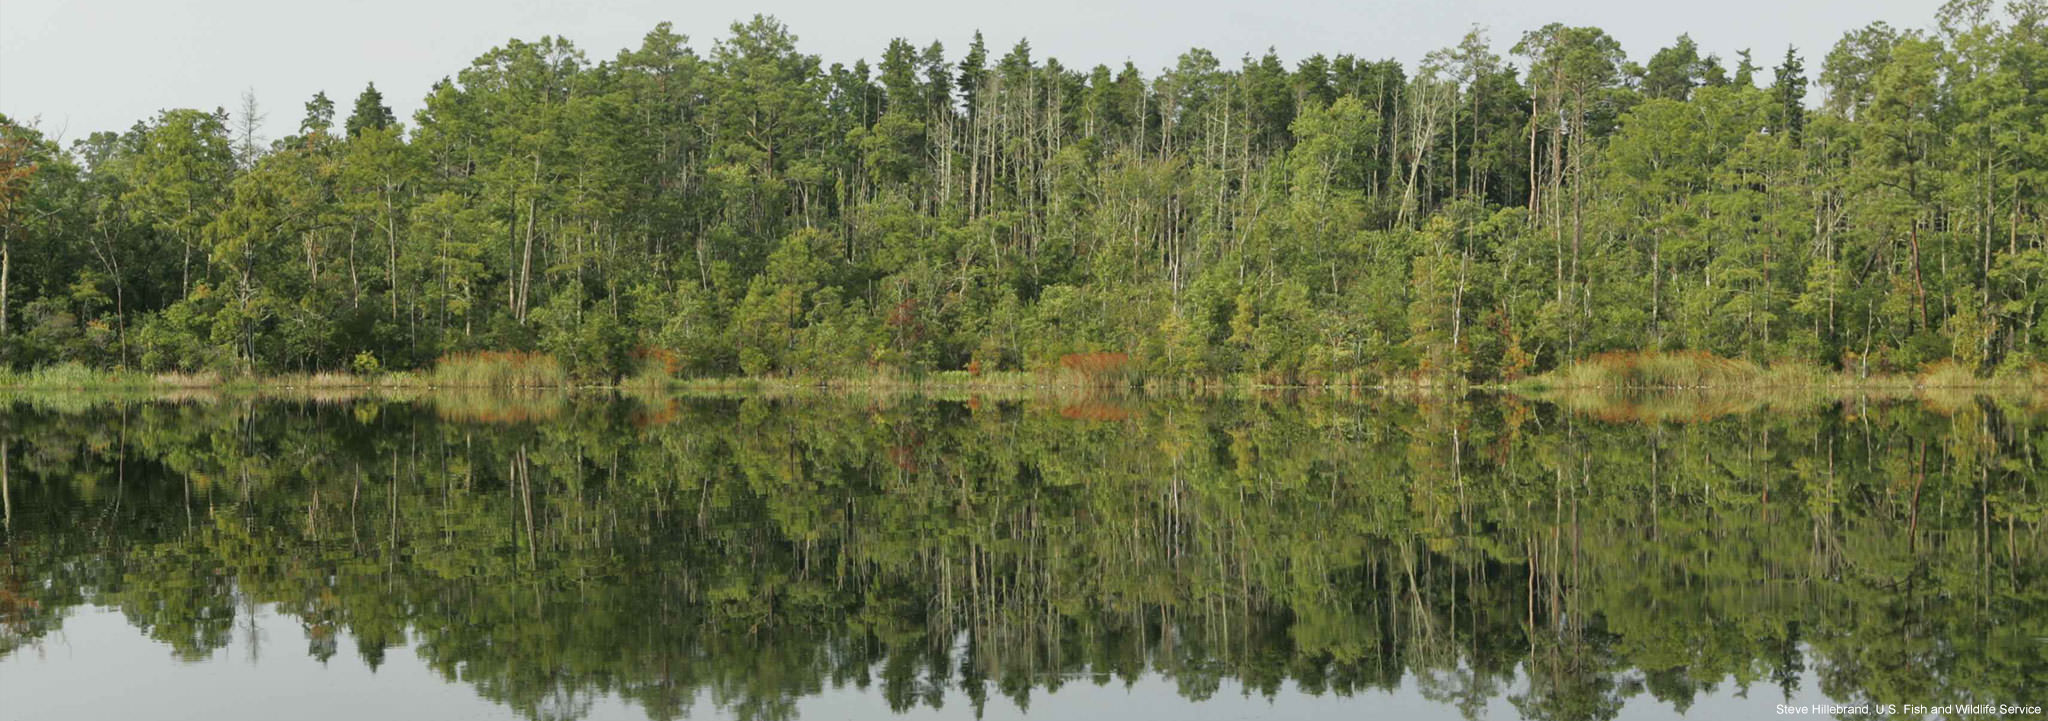 A pocosin pine forest lines the shore of a lake. Image credit: Steve Hillebrand, U.S. Fish and Wildlife Service